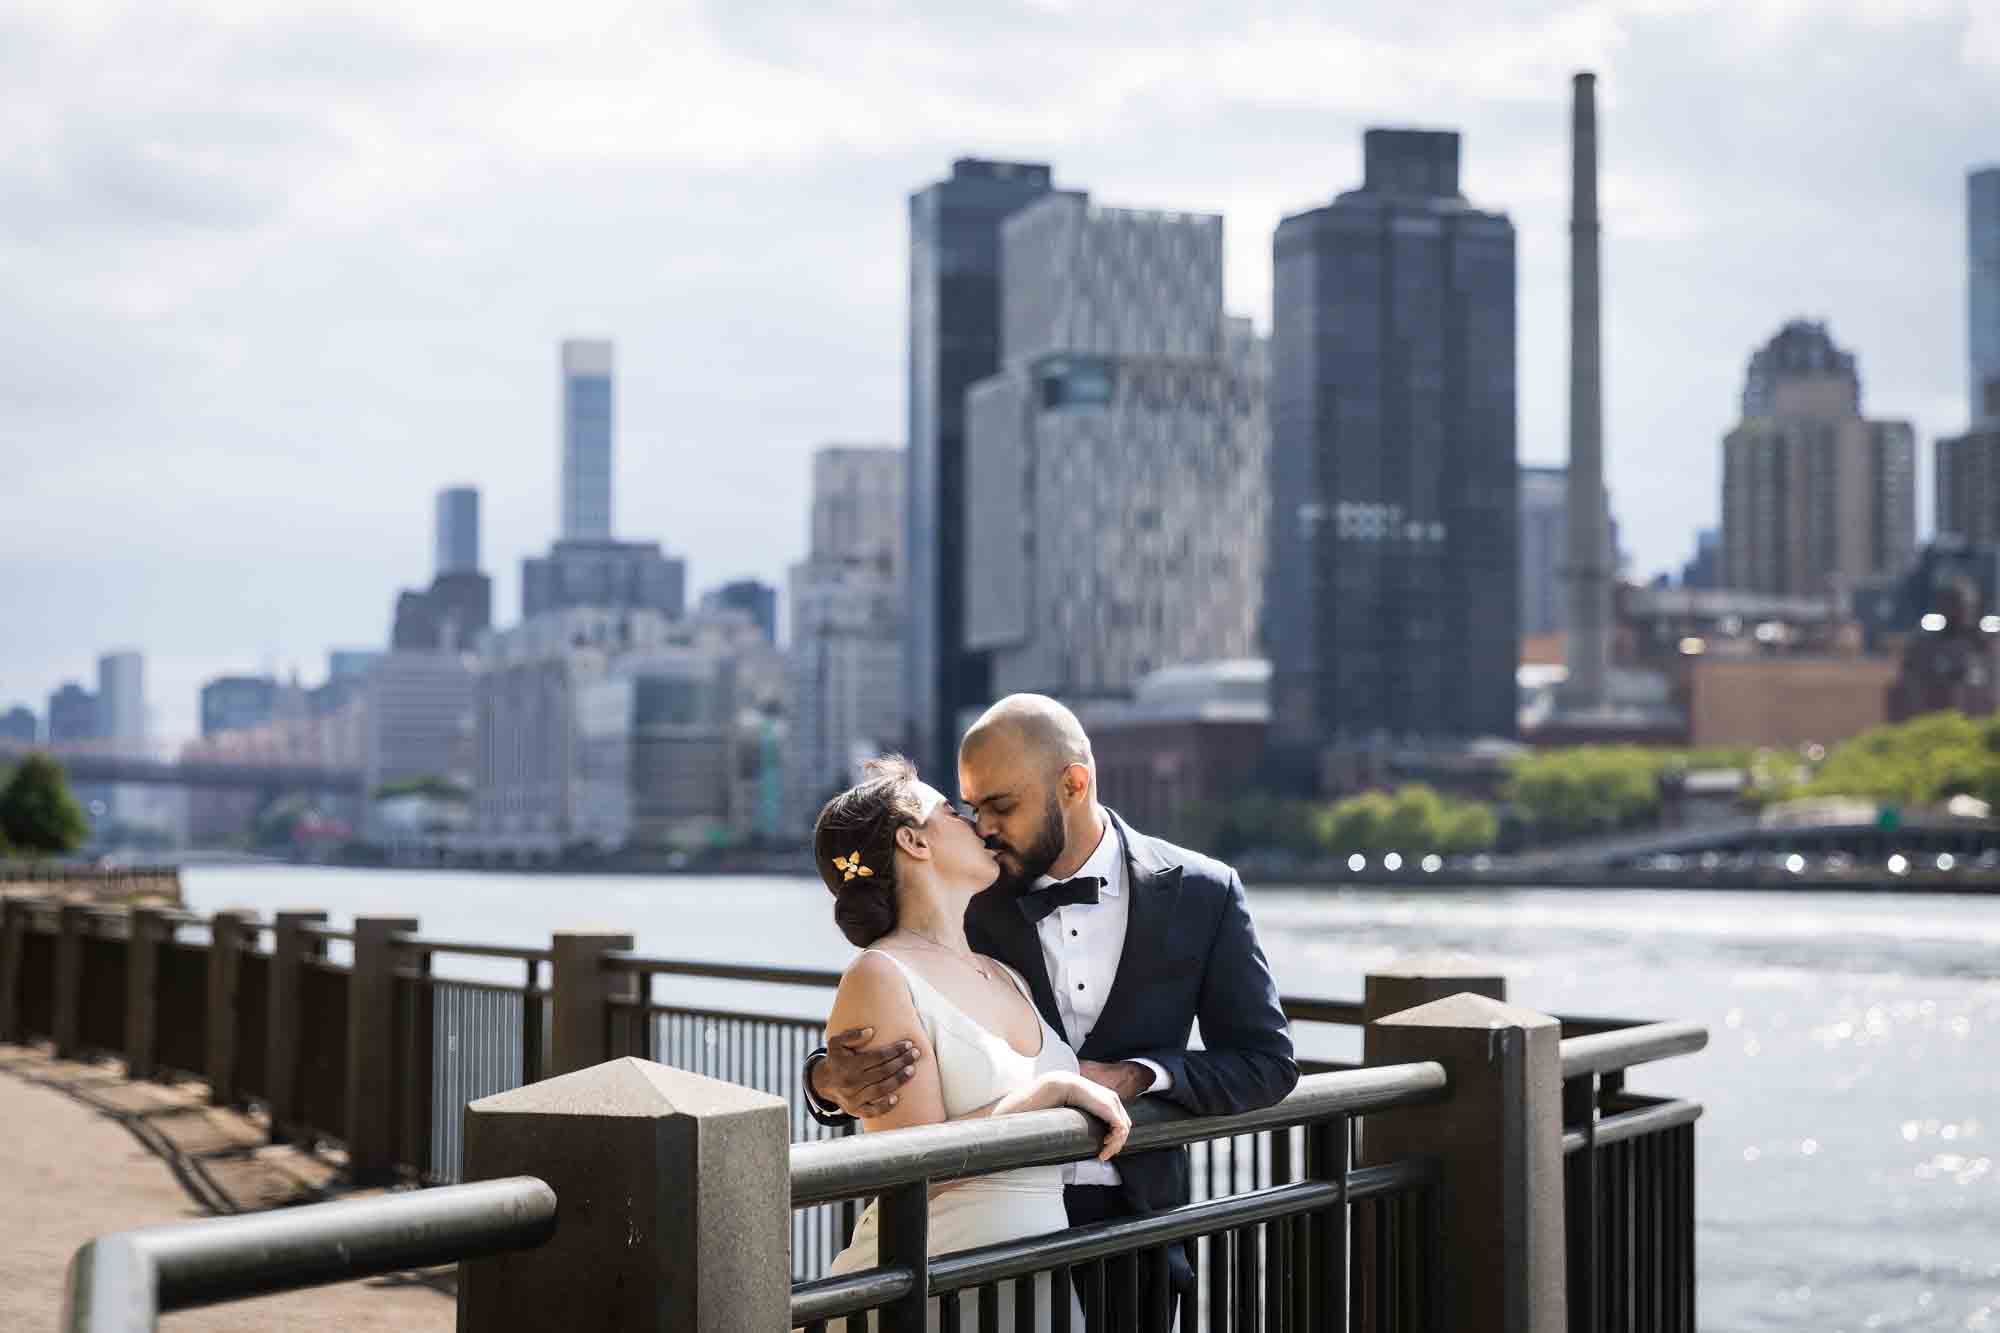 Bride and groom kissing along railing with river and city skyline in background